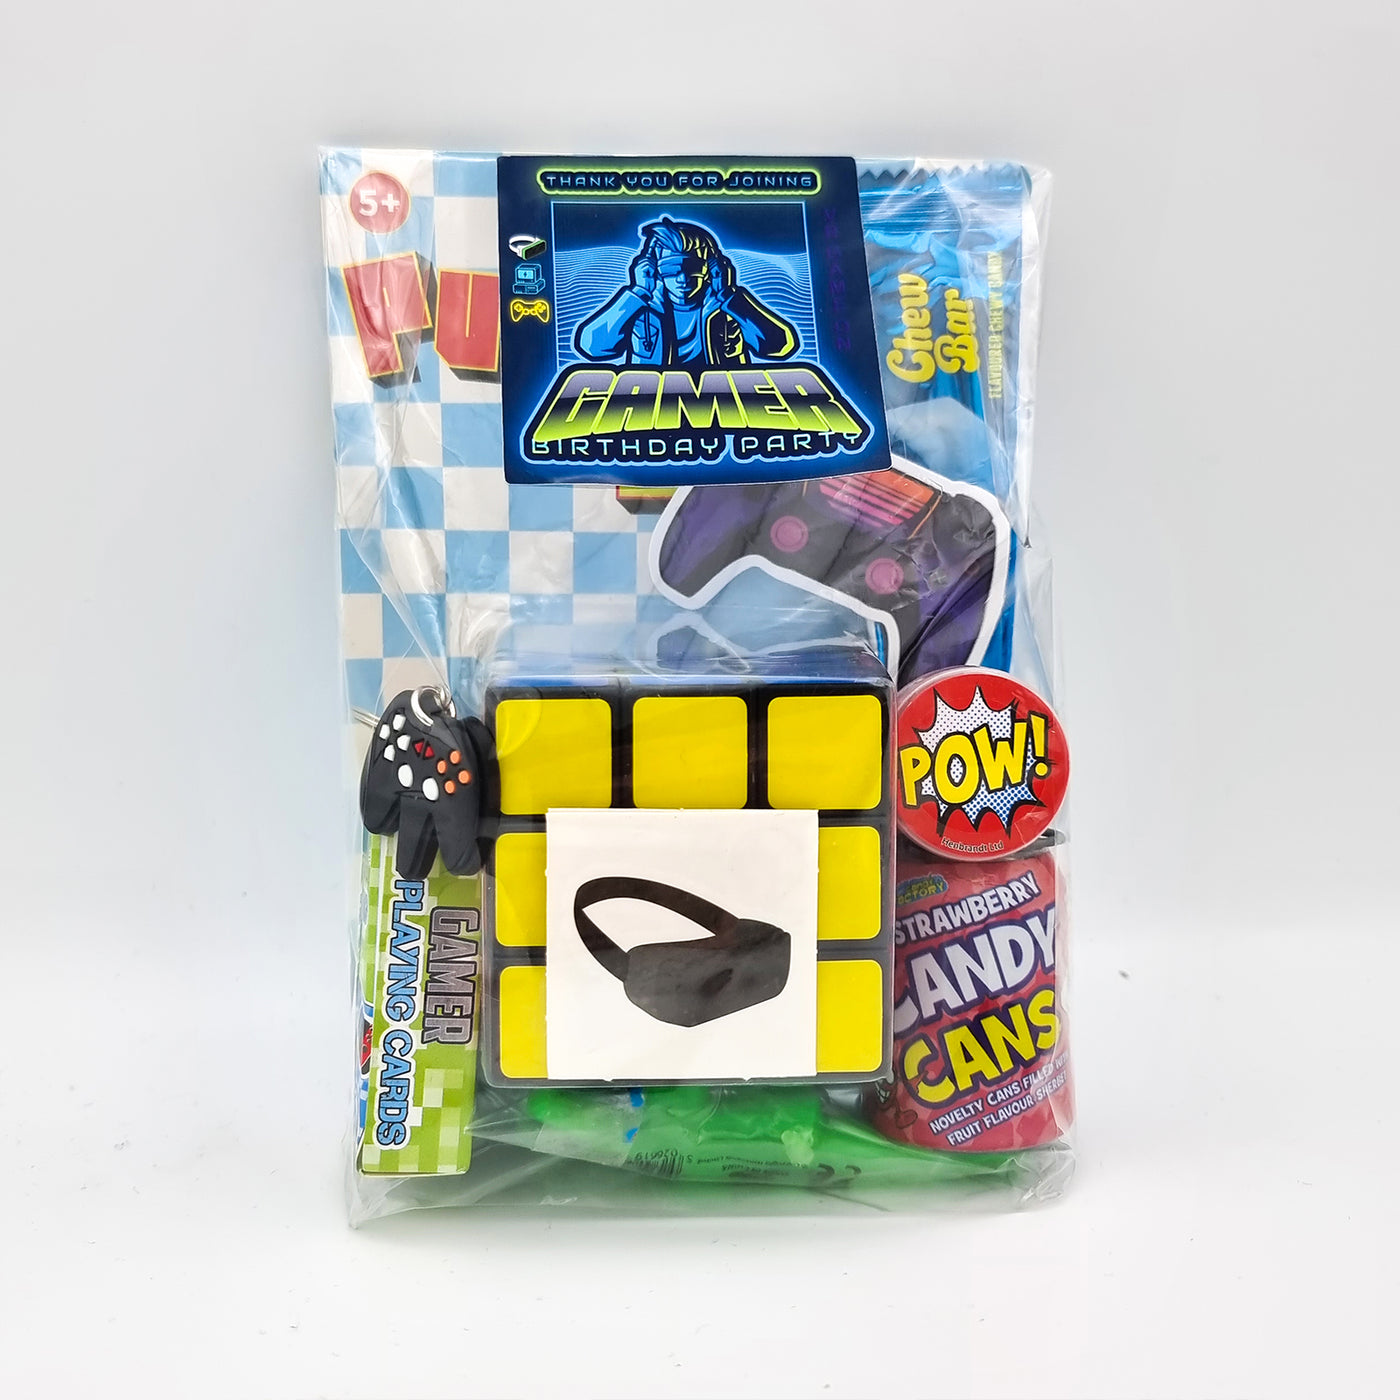 Pre Filled Birthday Virtual Gamer Party Bags For Older Boys, With Sweets And Toys, Party Favours.